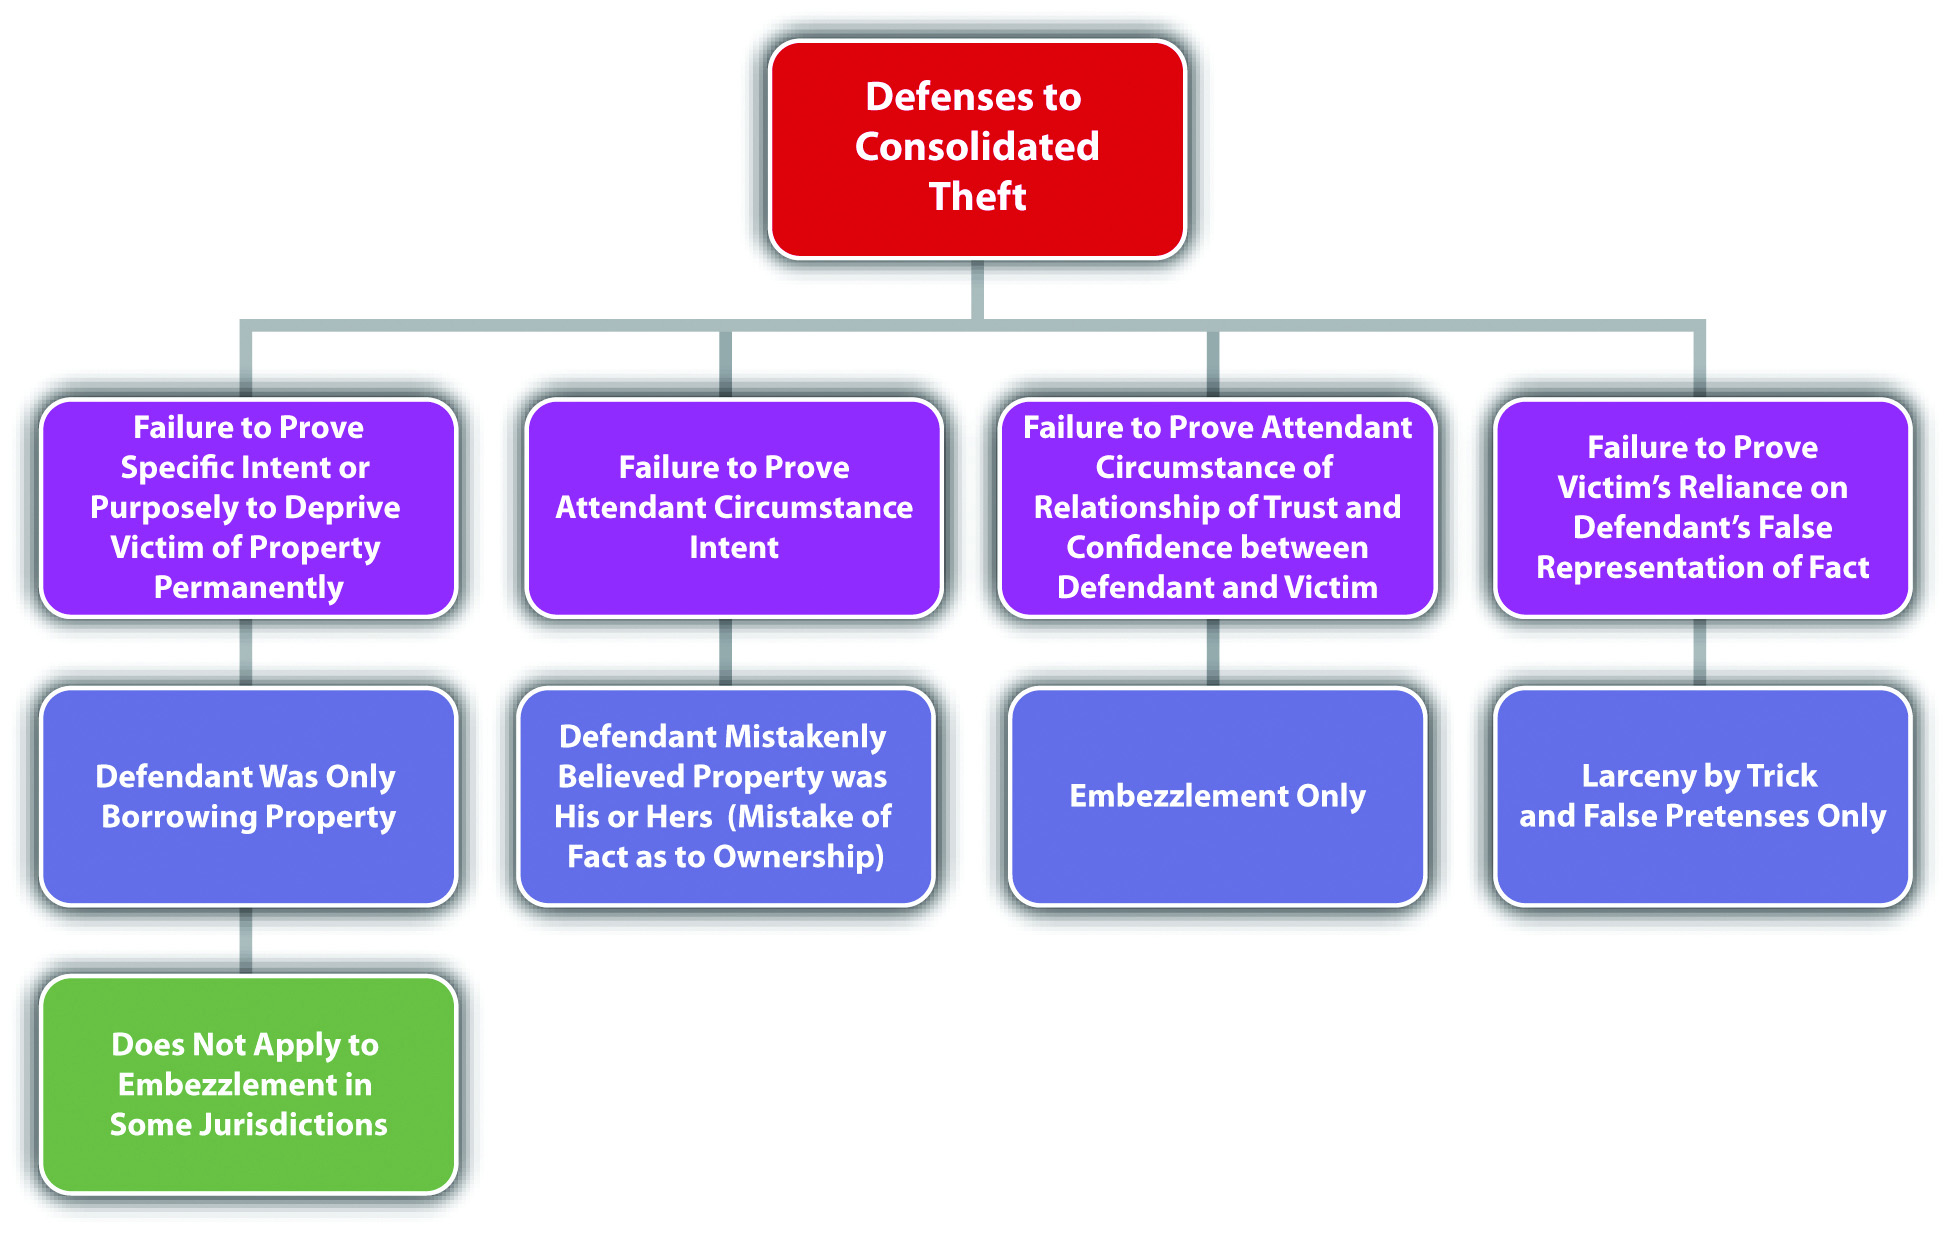 Diagram of Defenses to Consolidated Theft